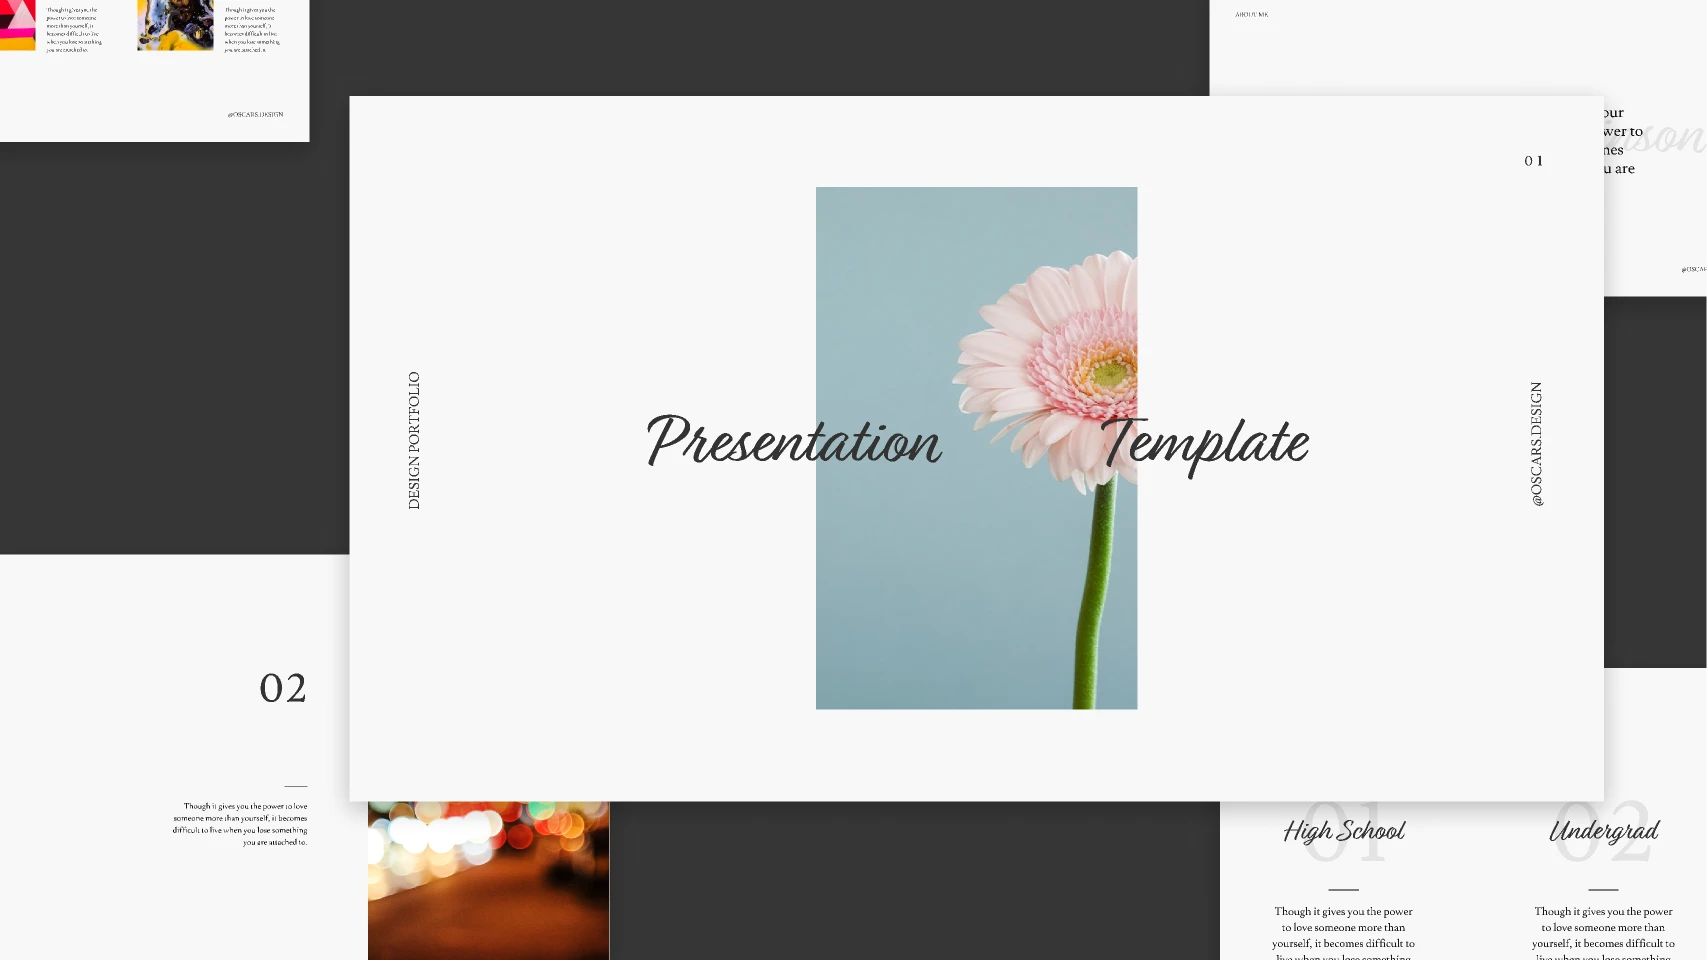 Presentation/Slide Template 03 for Figma and Adobe XD